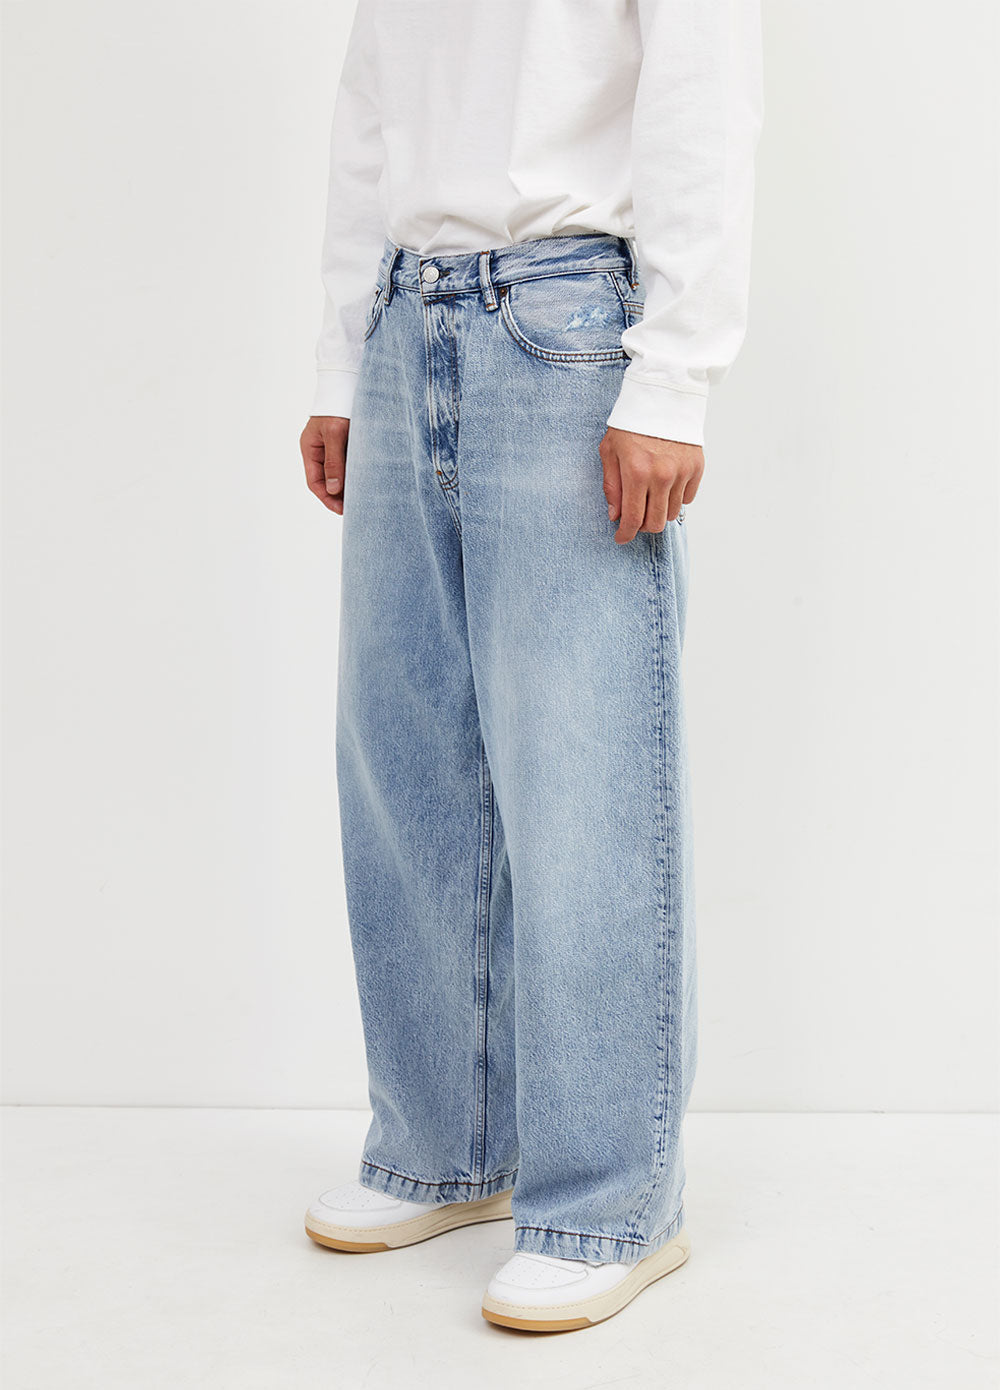 Roger Baggy Jeans